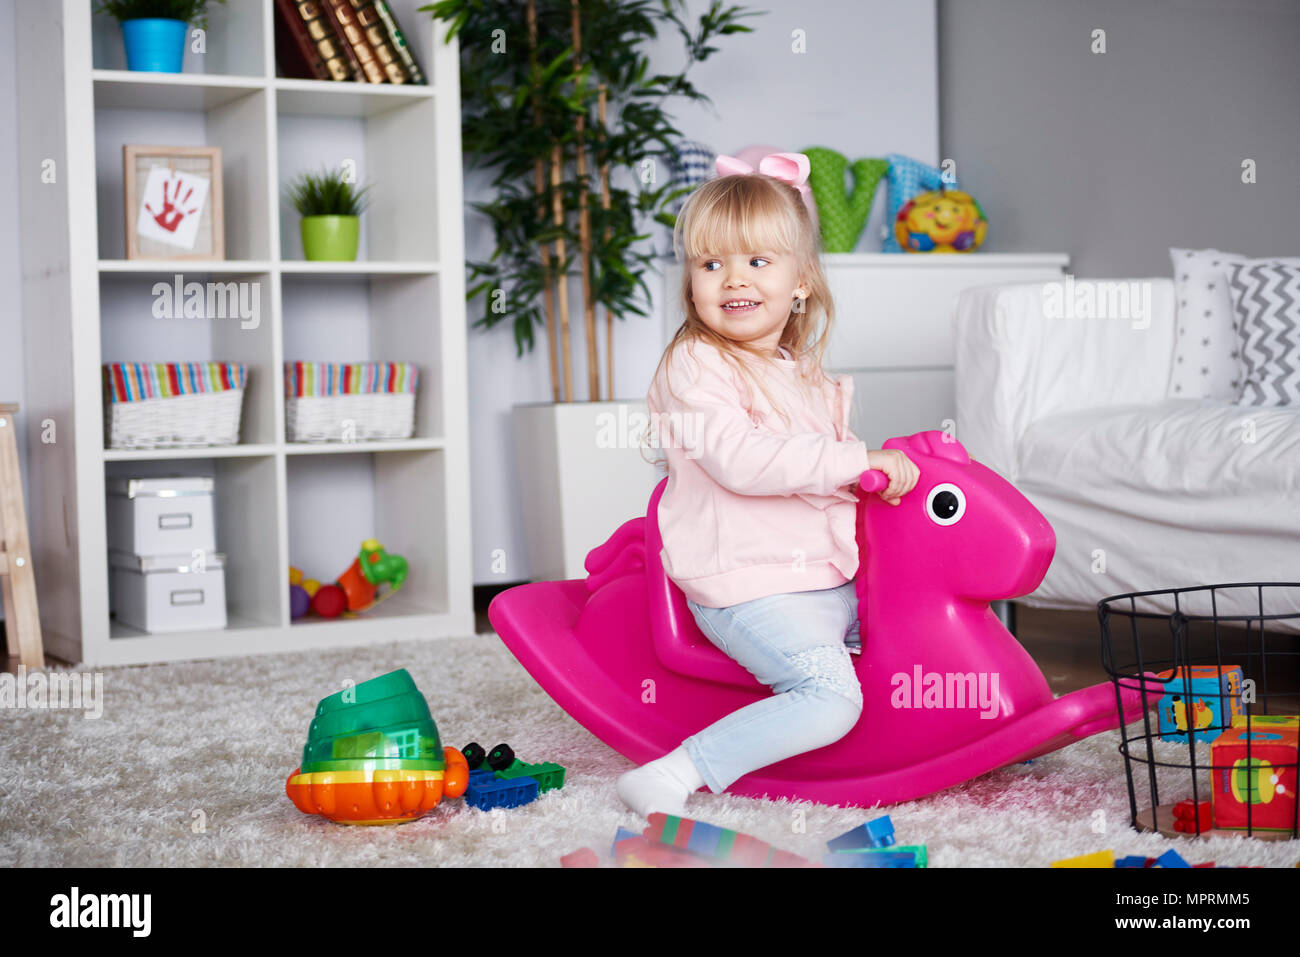 Portrait of smiling little girl sitting on pink rocking horse in the living room Stock Photo